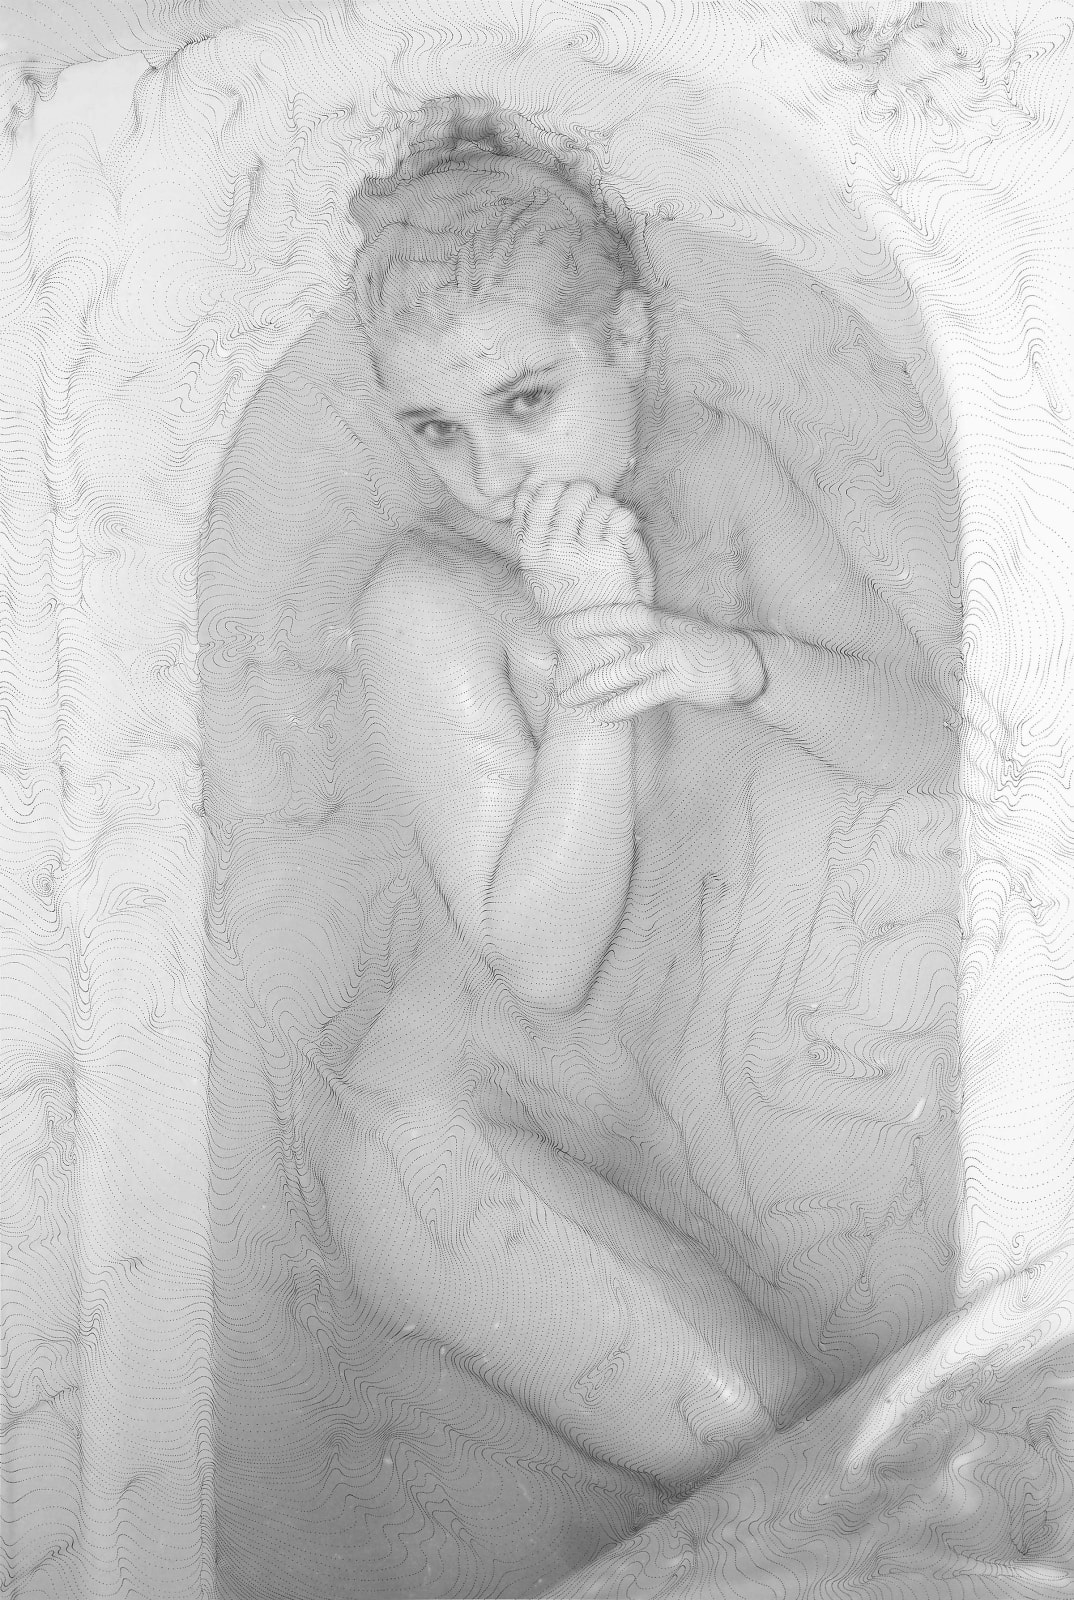 Sebastiaan Bremer Ave Maria 4 nude woman in bathtub with hand on mouth gray dot image